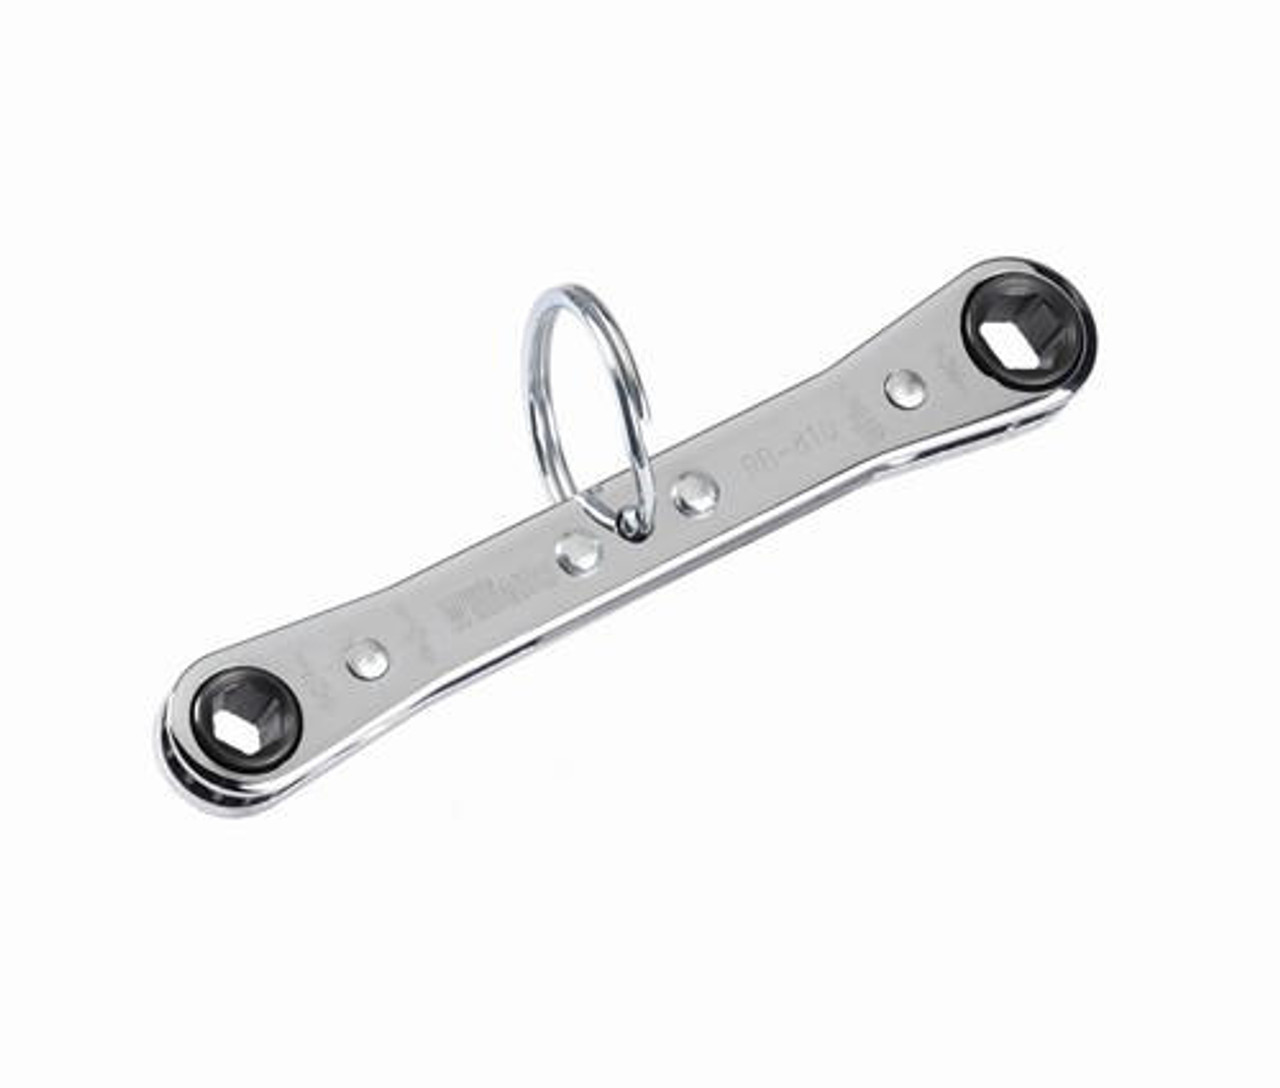 Williams 1/2" x 9/16" Williams Tools At Height Ratcheting Box Wrench - 6 Pt - RB-1618-TH 